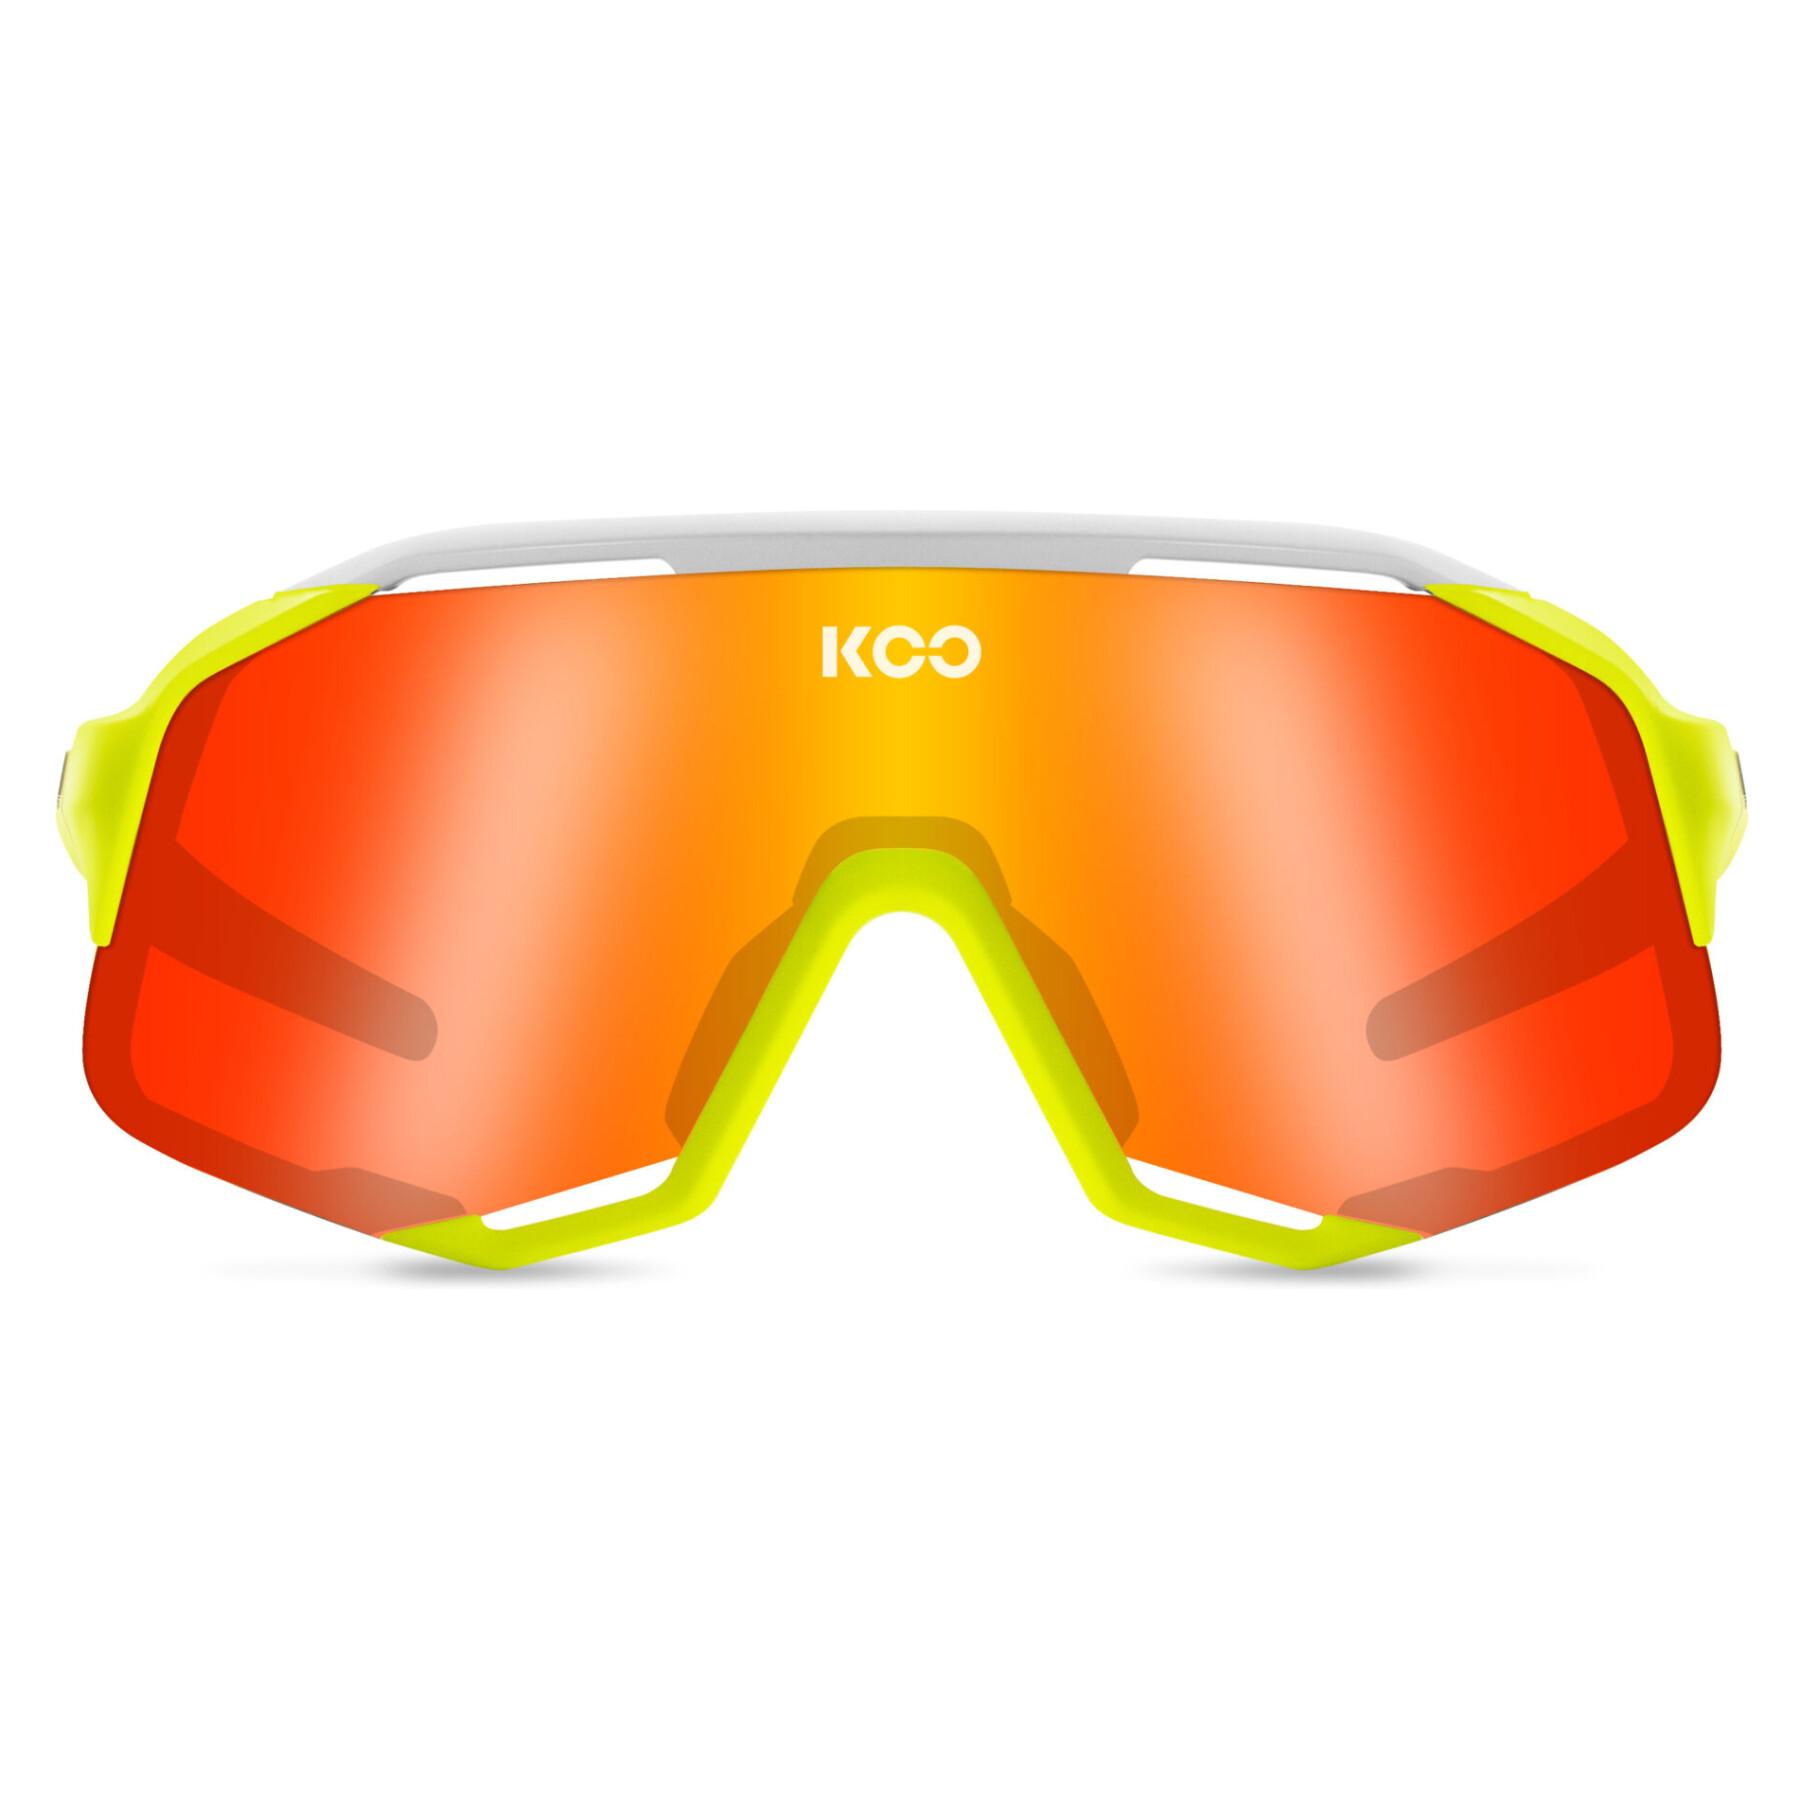 Sonnenbrille Koo demos energy capsule collection